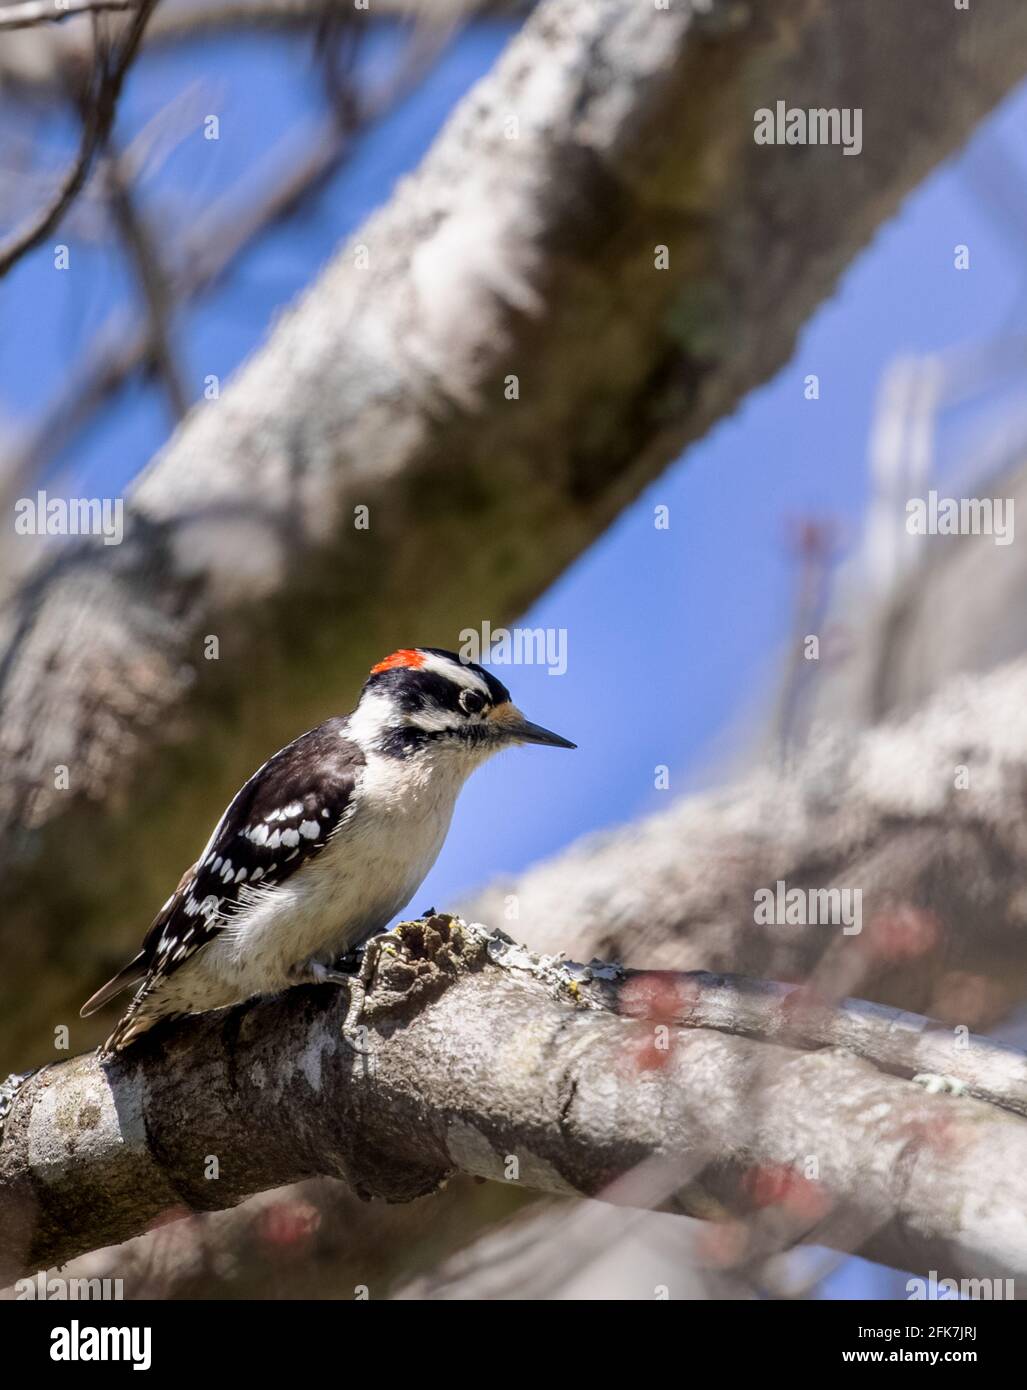 Downy woodpecker (picoides pubescens) - Hall County, Georgia. Male Downy woodpecker taking a break from the daily search for food. Stock Photo